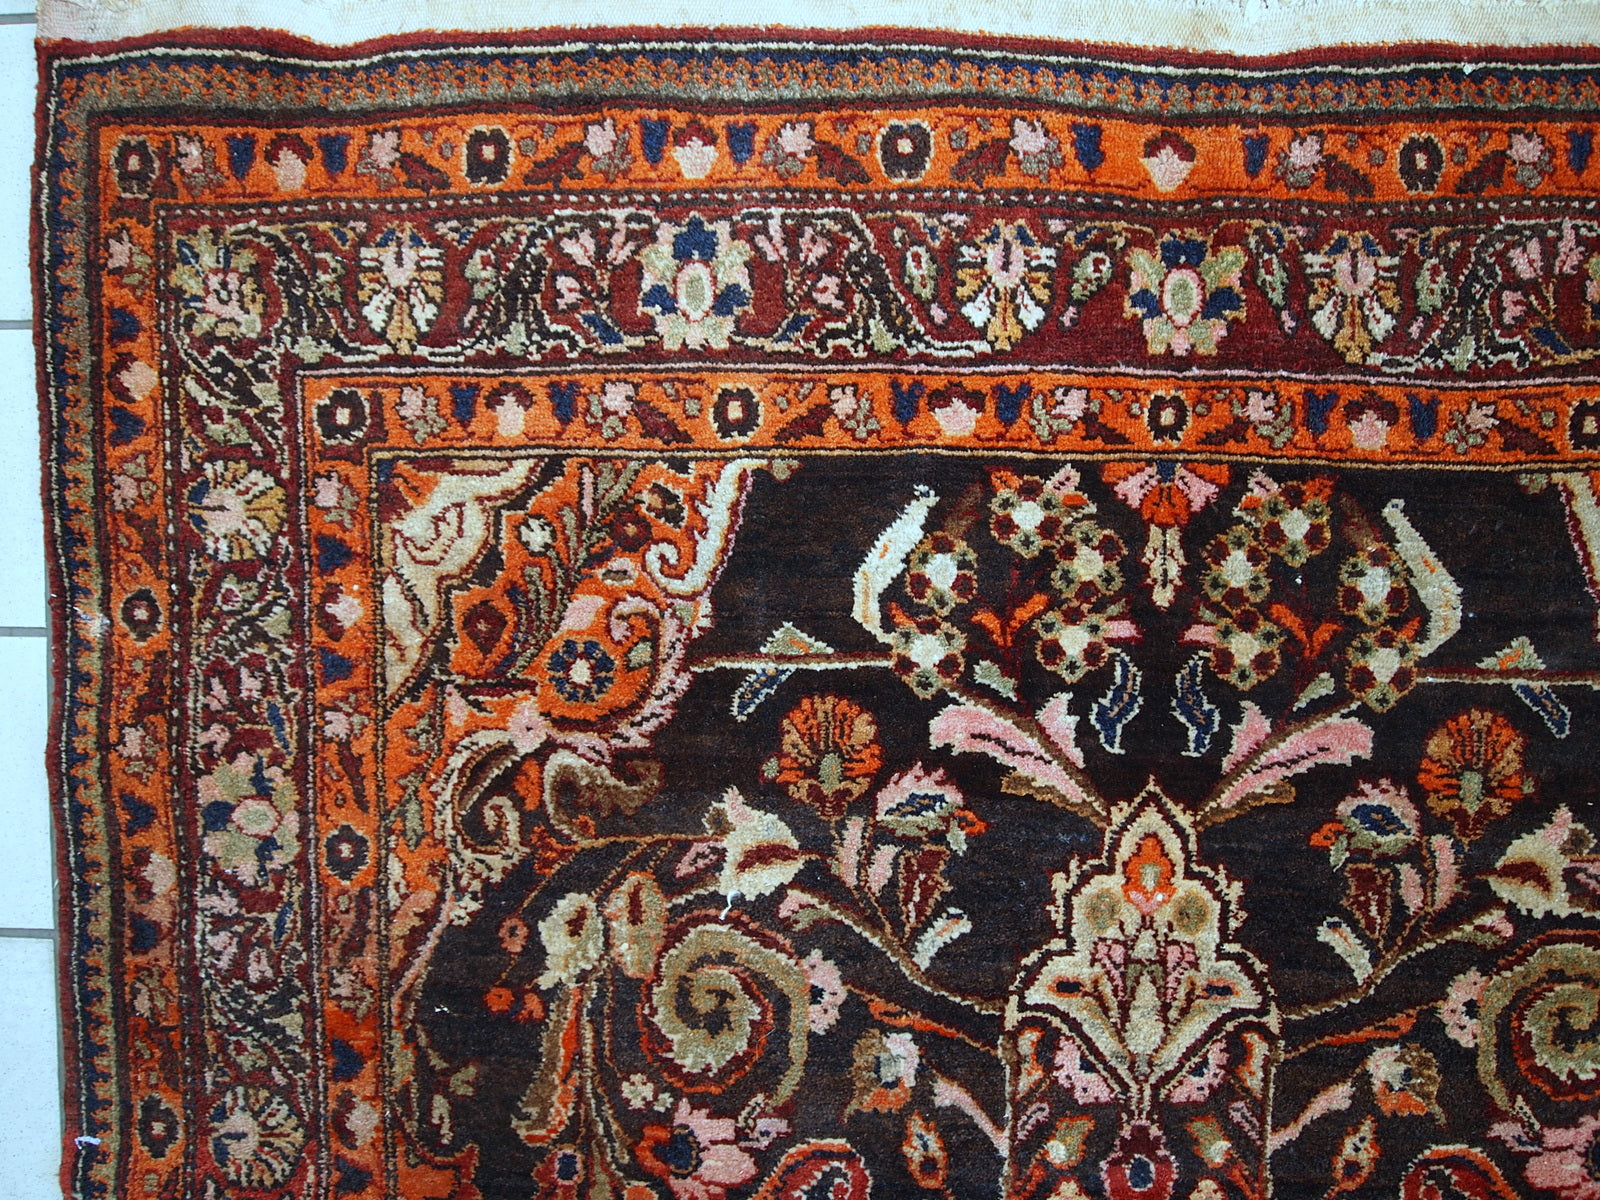 Vintage Persian Tabriz rug in original good condition. It is in chocolate brown and orange wool with some olive and pink shades.